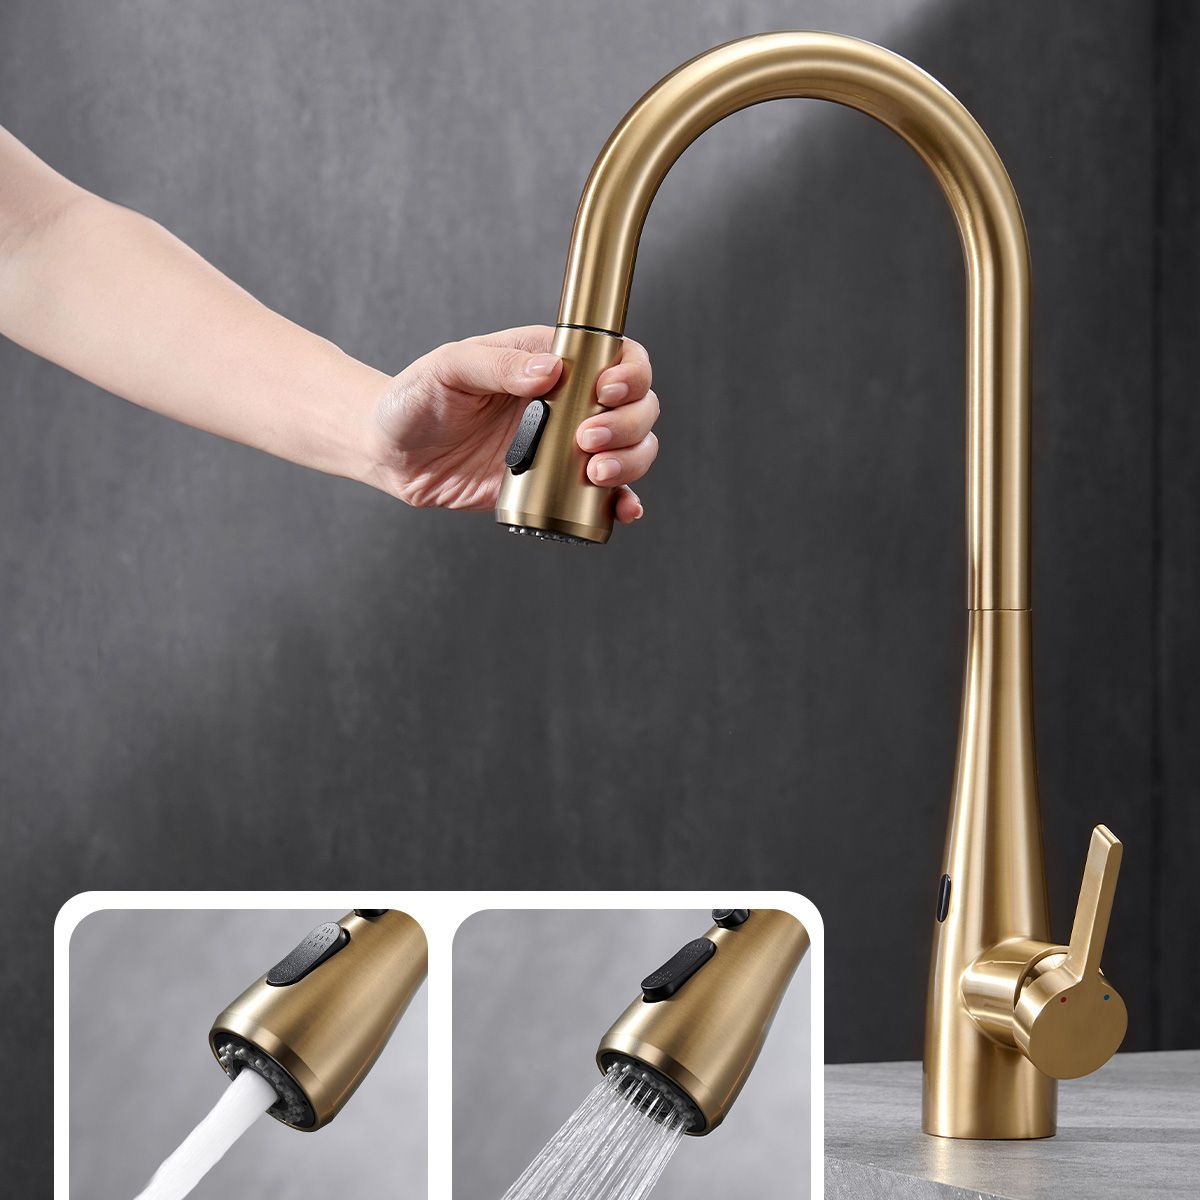 Modern Touchless Sensor Kitchen Sink Faucet Swivel Spout with Pull Out Sprayer